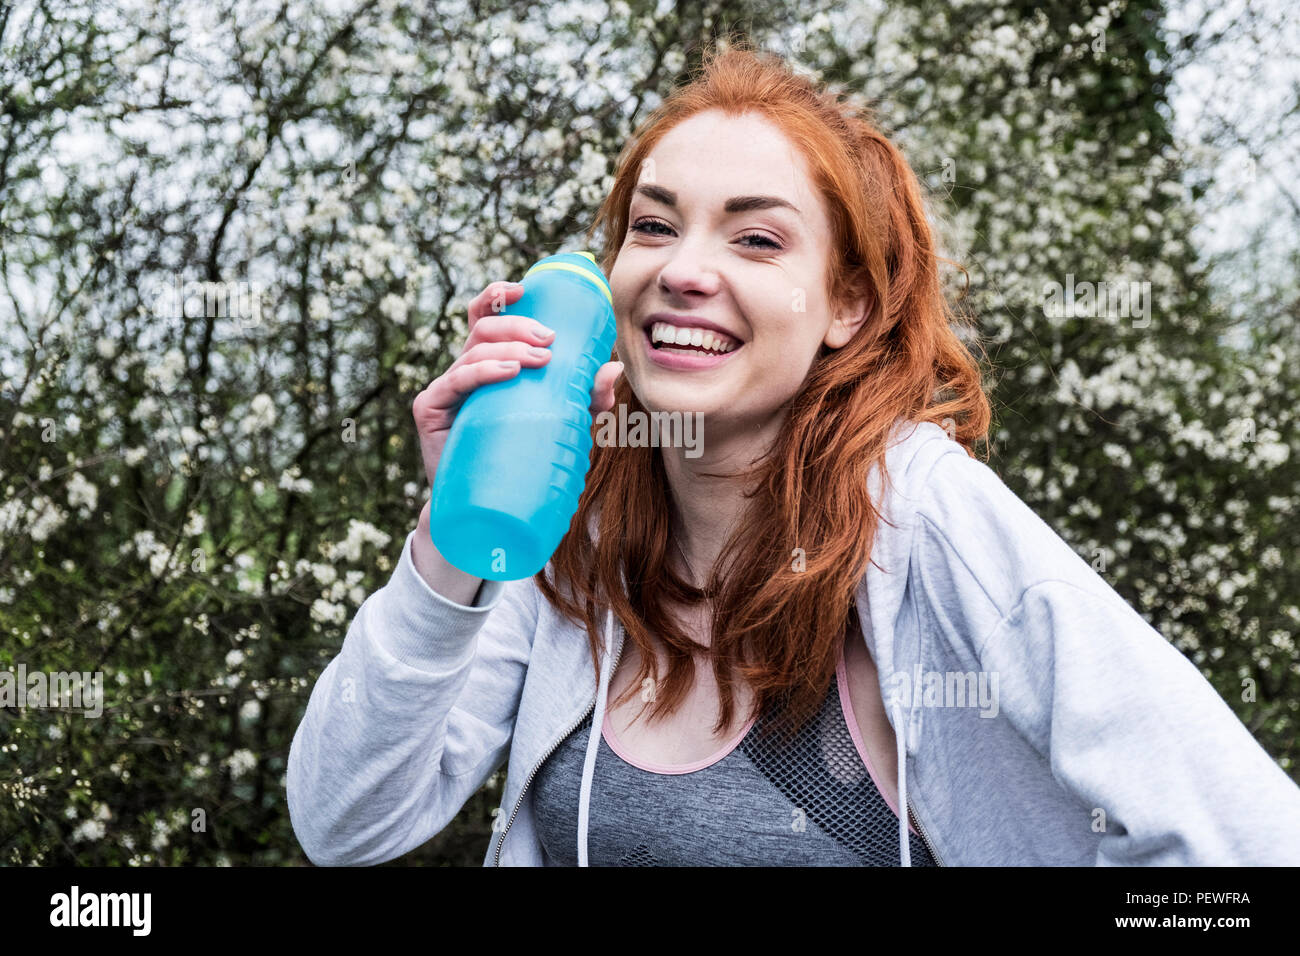 Smiling young woman with long red hair wearing sportswear, exercising outdoors, looking at camera. Stock Photo